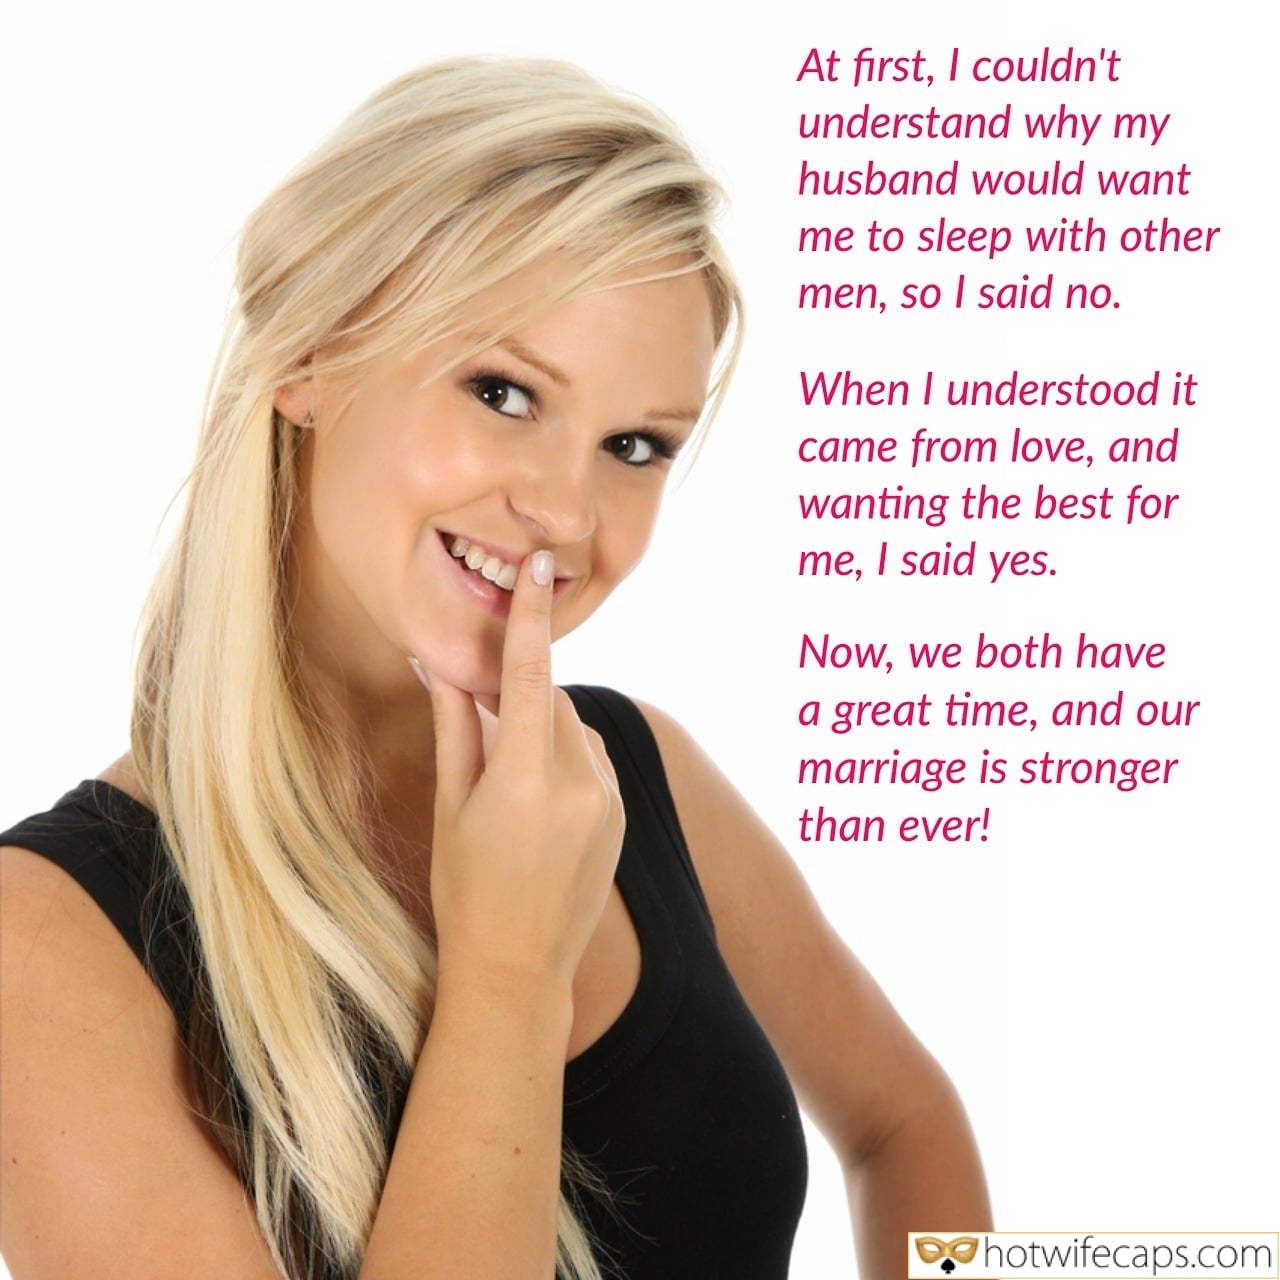 Wife Sharing Tips Sexy Memes Cuckold Cleanup Cheating hotwife caption: At first, I couldn’t understand why my husband would want me to sleep with other men, so I said no. When I understood it came from love, and wanting the best for me, I said yes. Now, we both have...